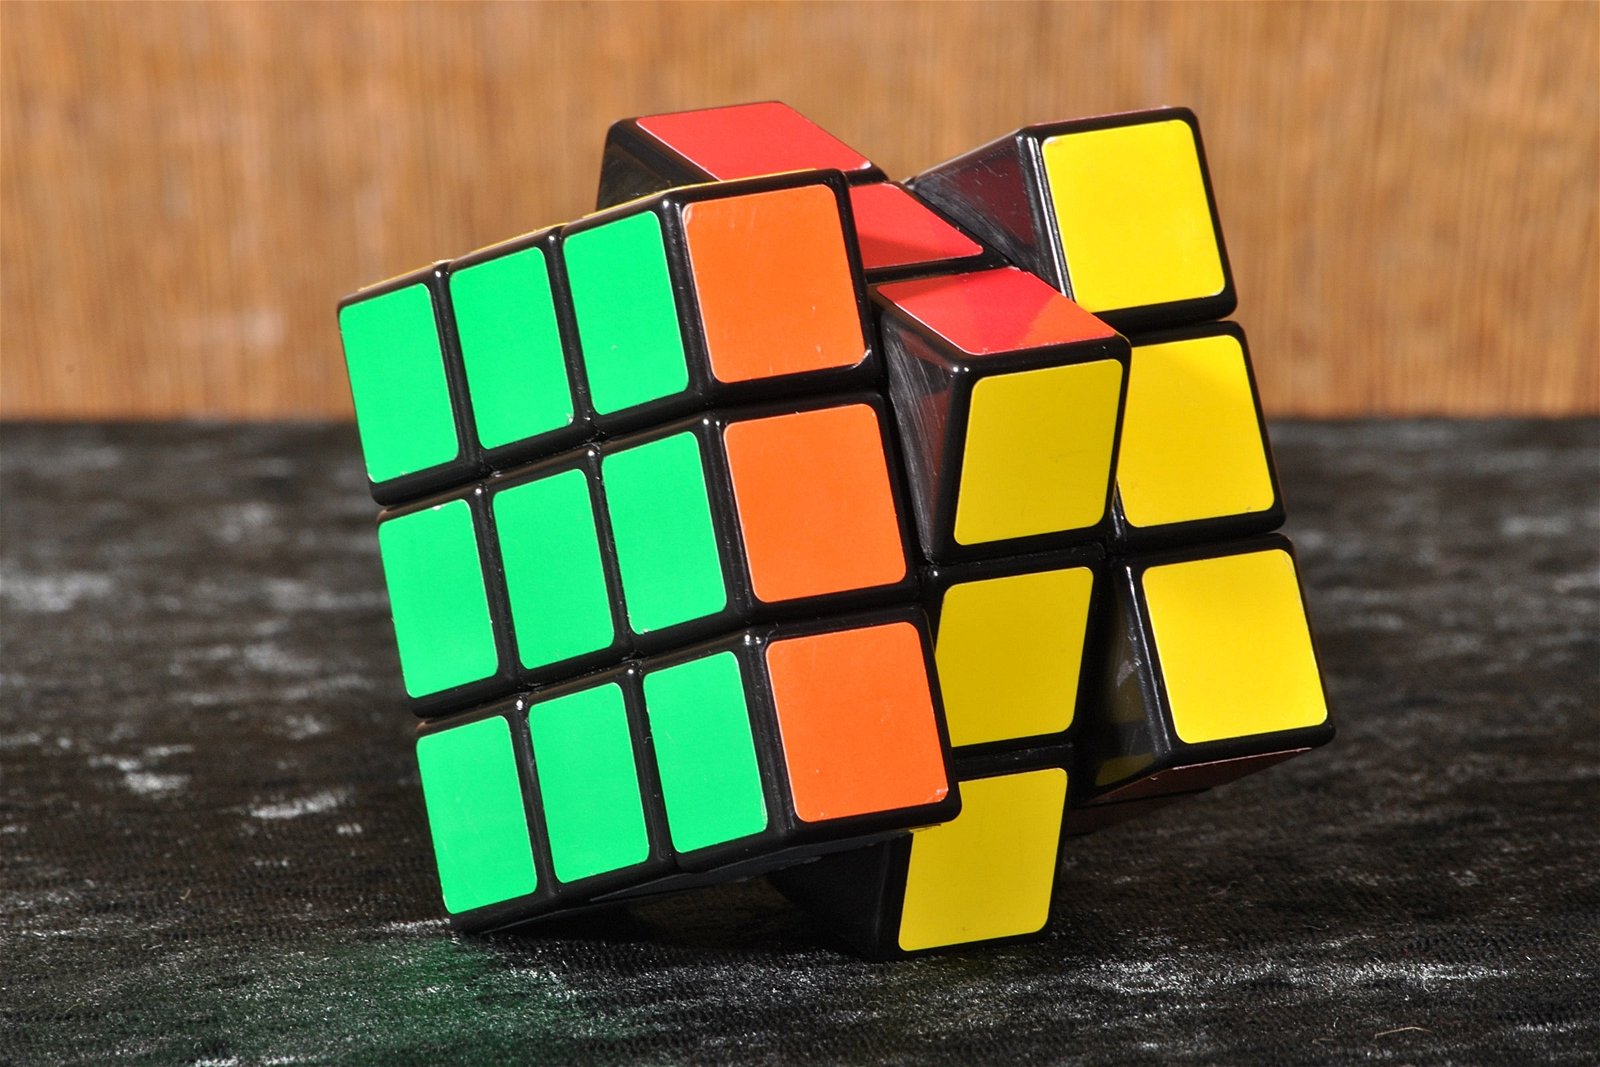 who invented the rubik's cube